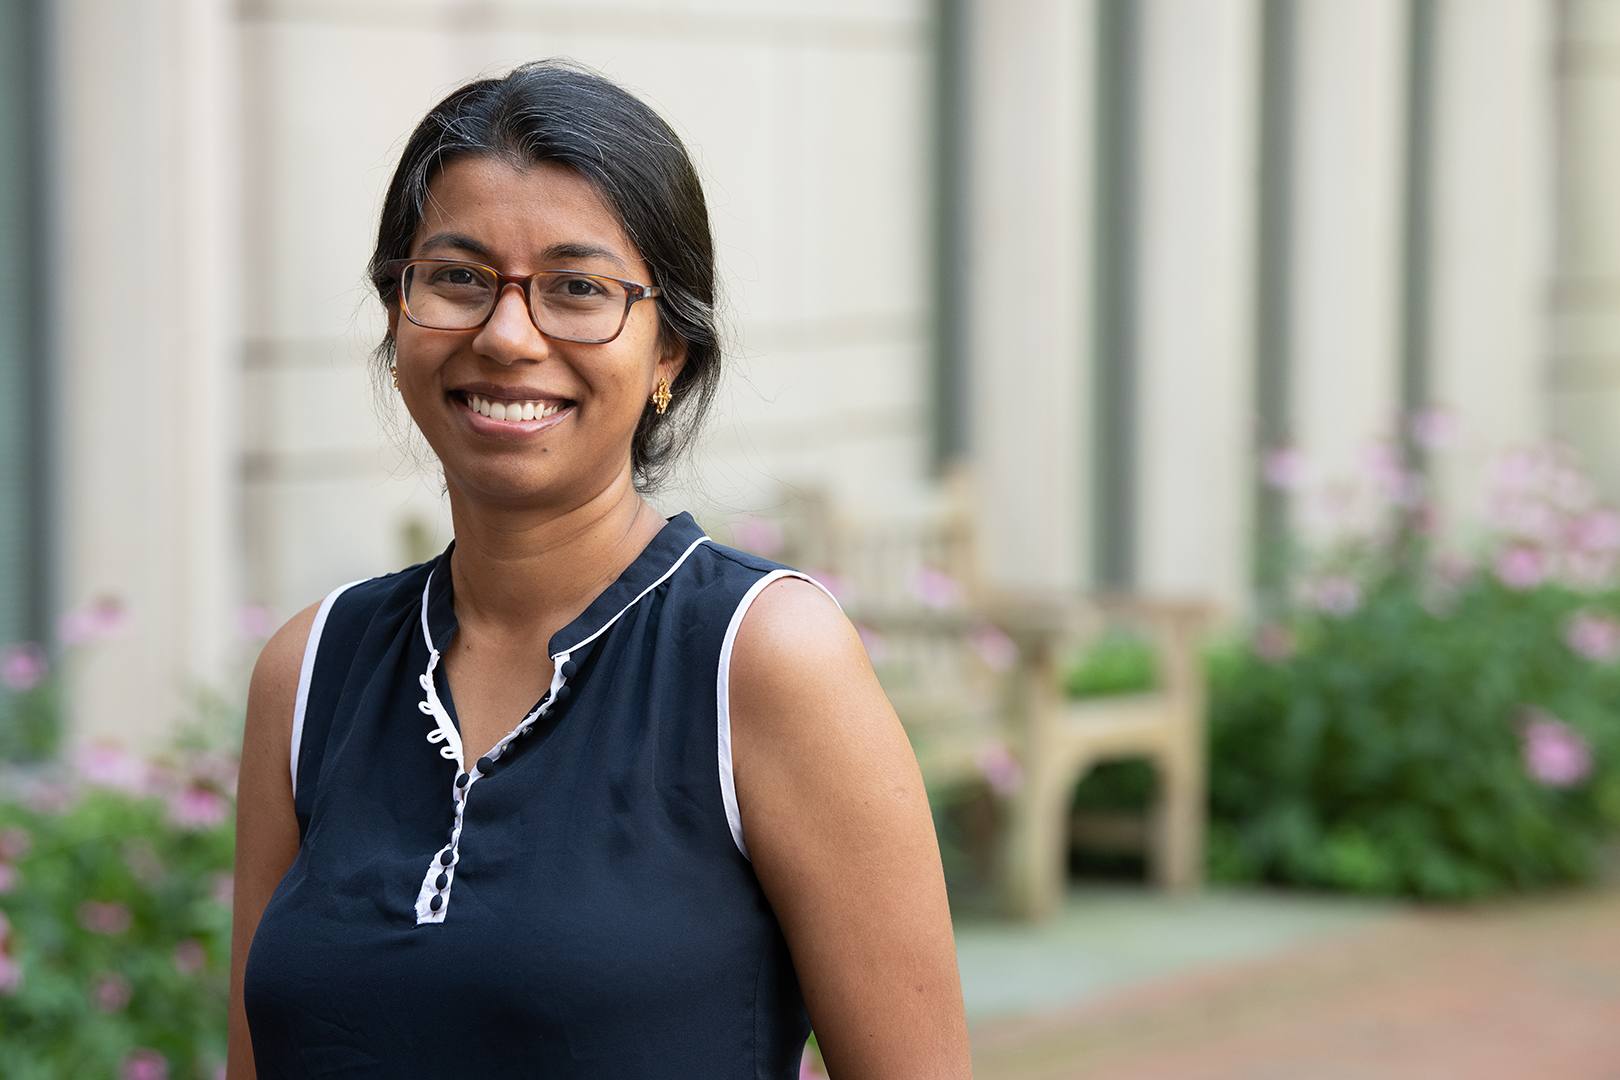 Maryland Carey Law welcomes Aadhithi Padmanabhan to the faculty